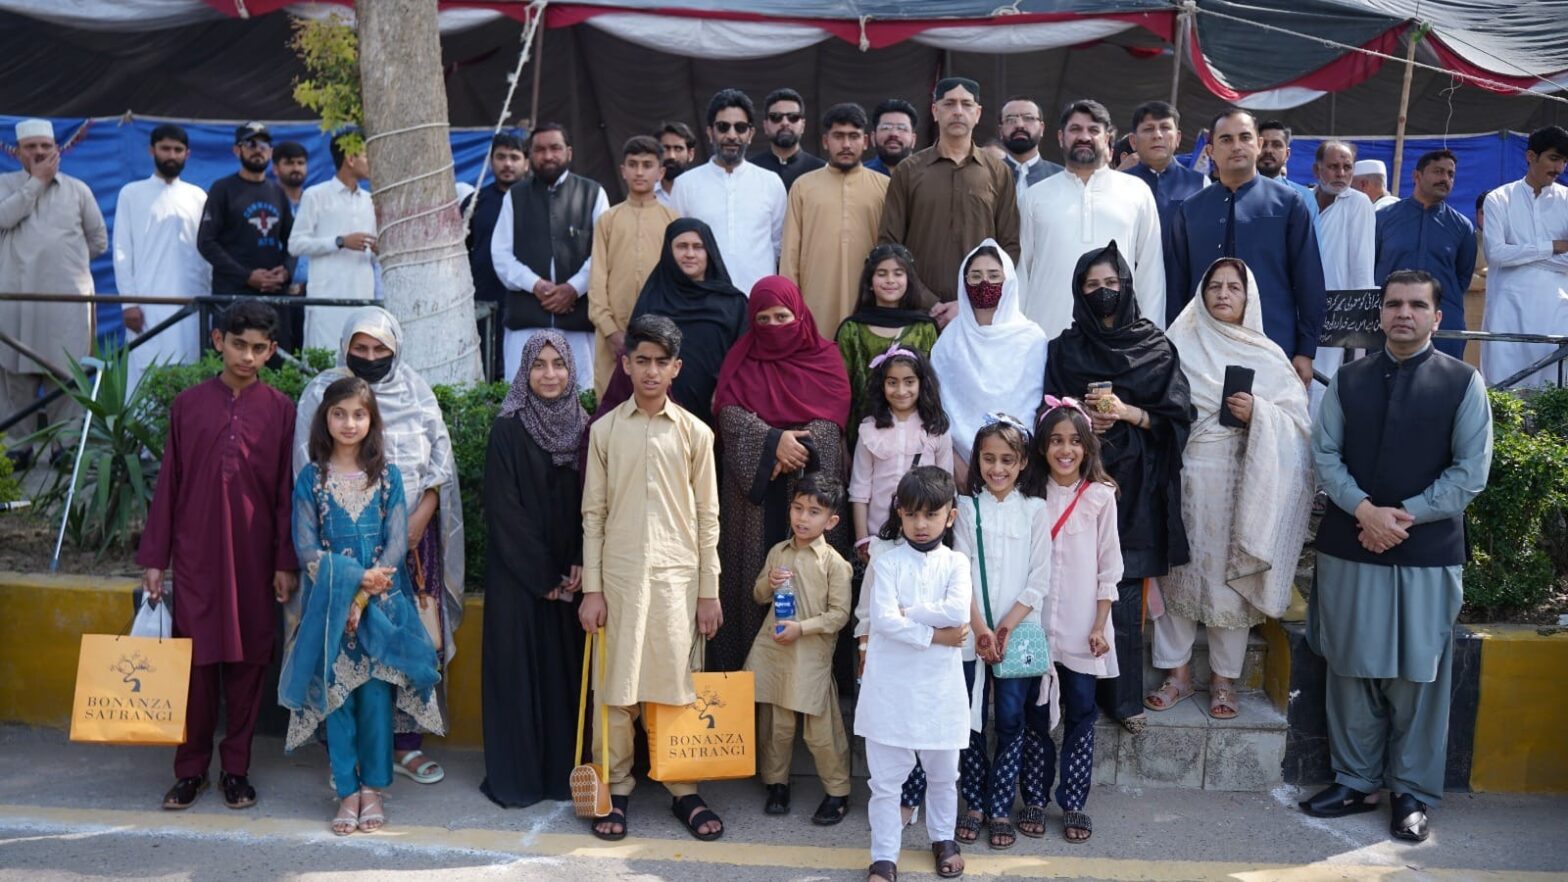 Islamabad Police organises Eid feast for martyrs families, police officials